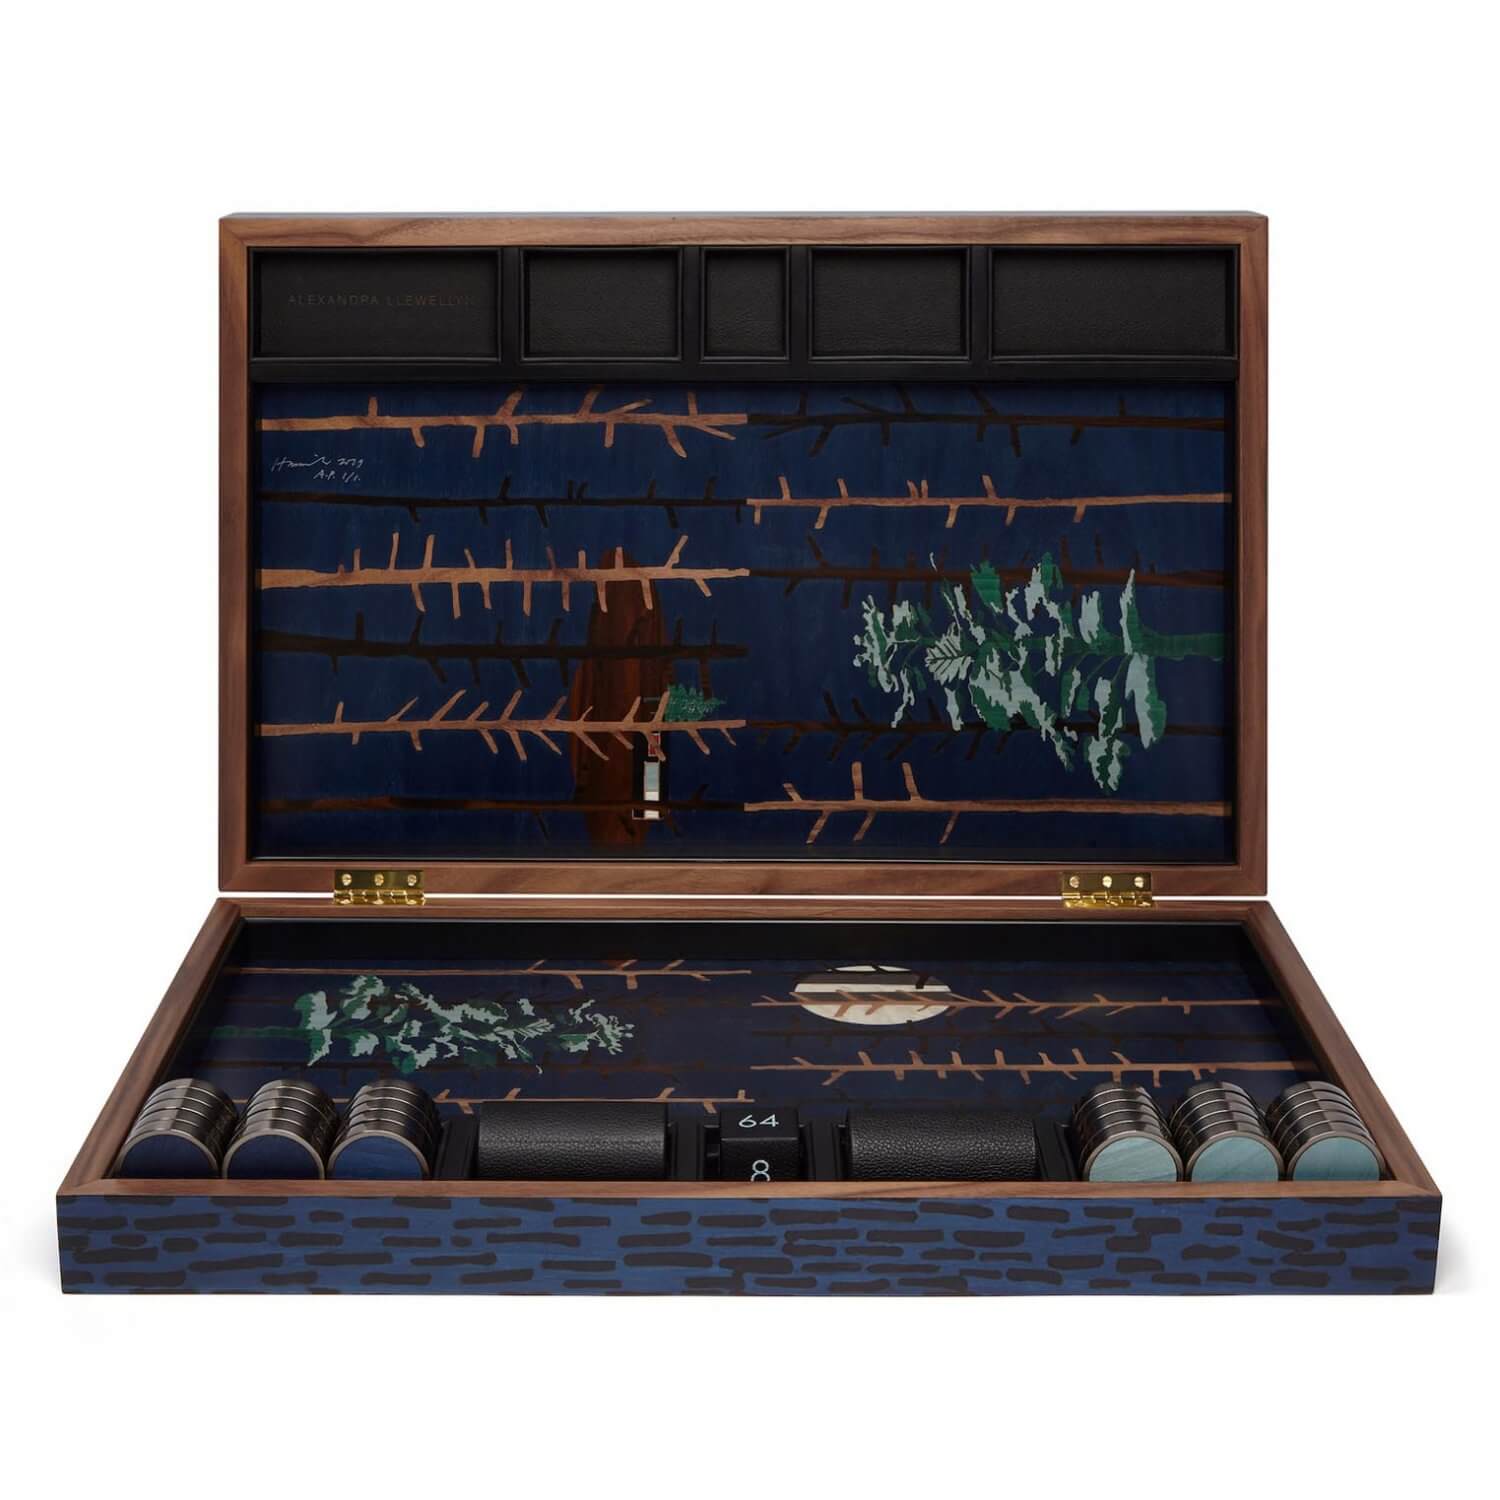 Tom hammock backgammon box in a bespoke marquetry box and playing pieces